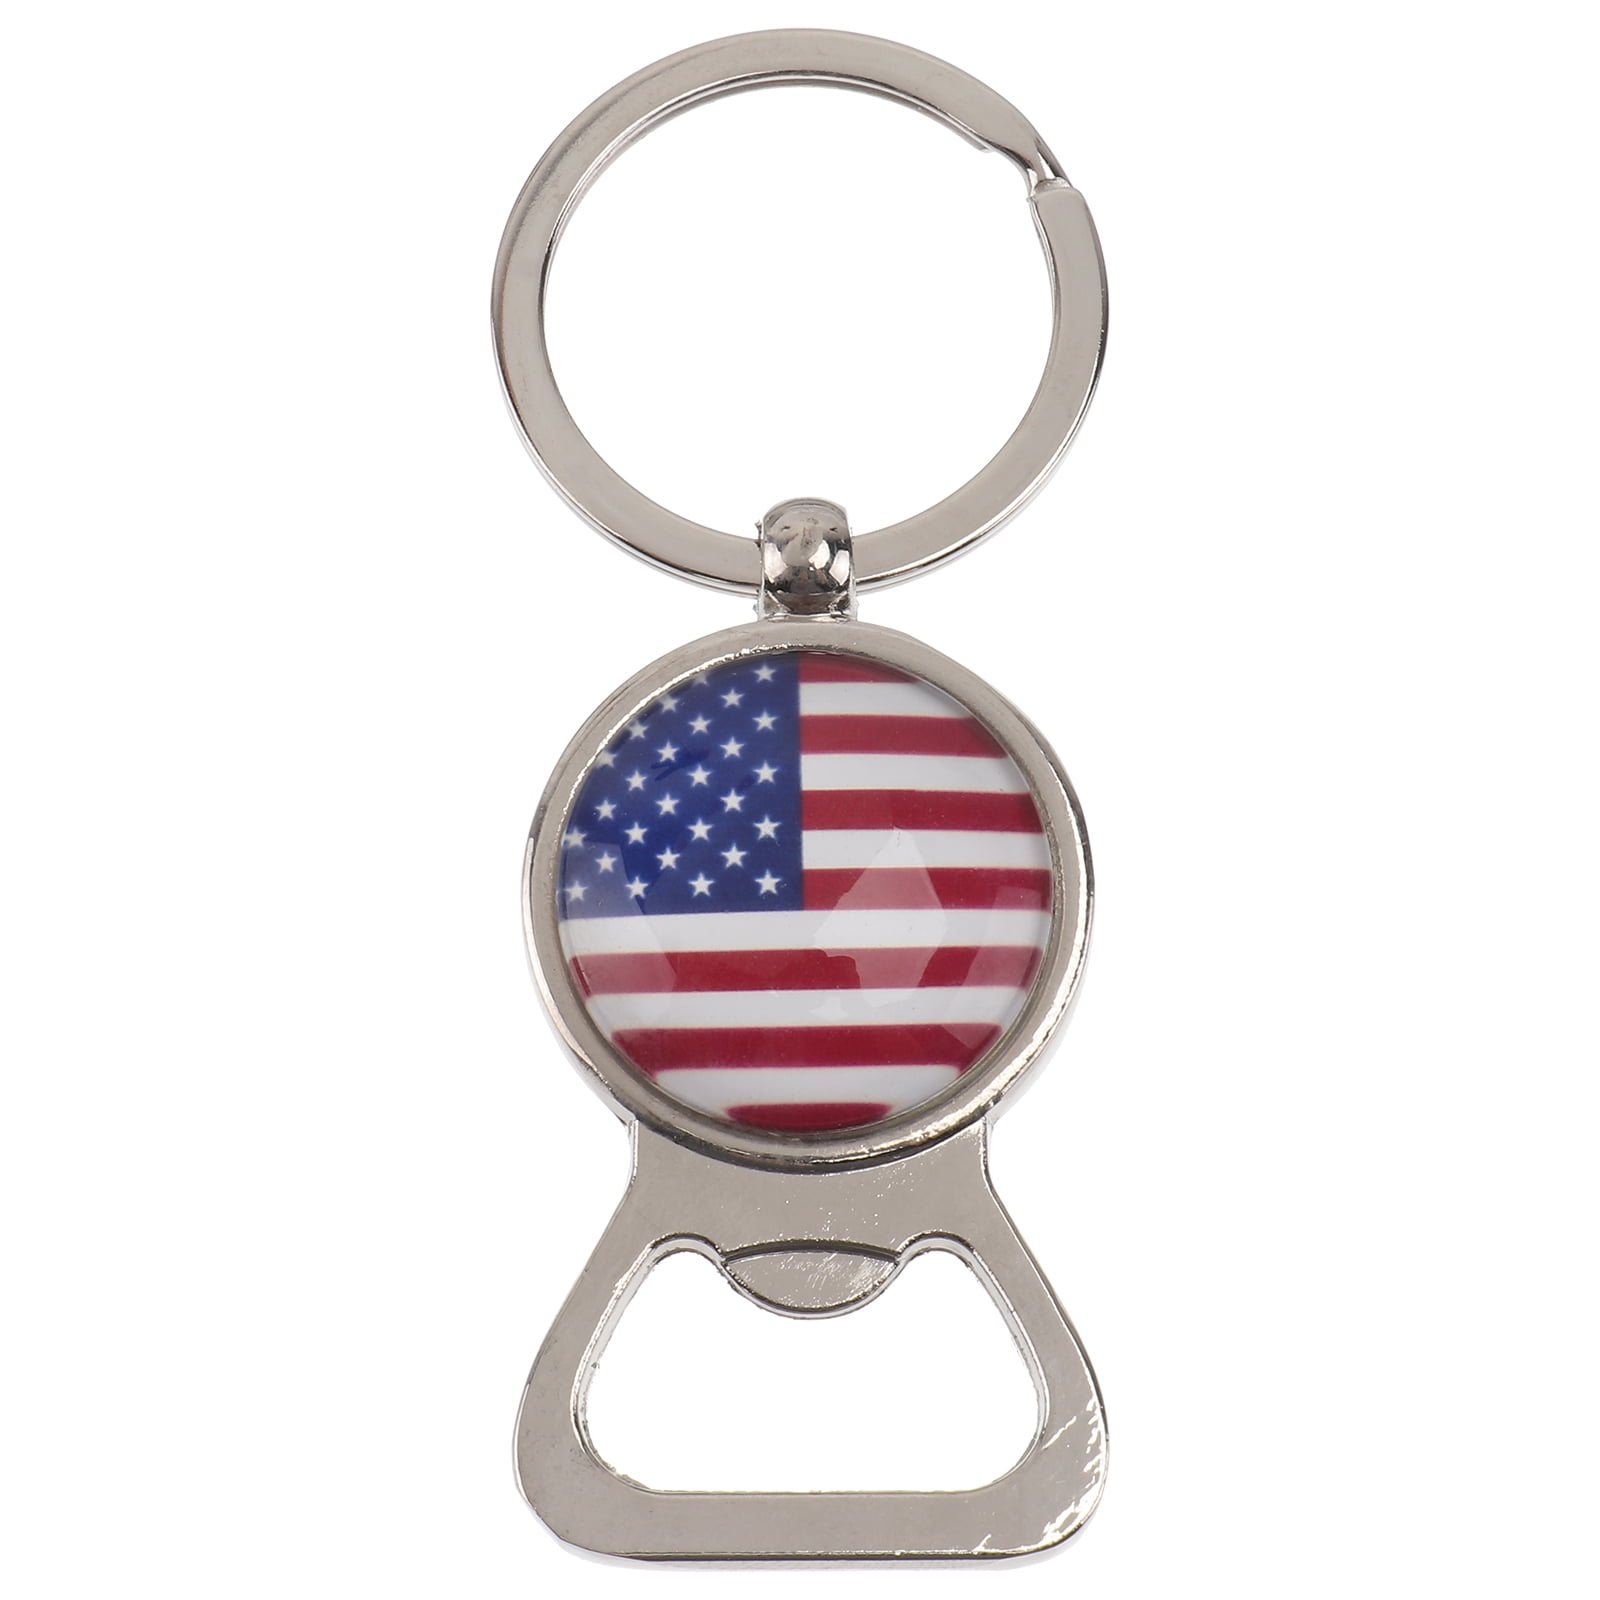 USA US flag keychain US SELLER key chain great gift United States of America 